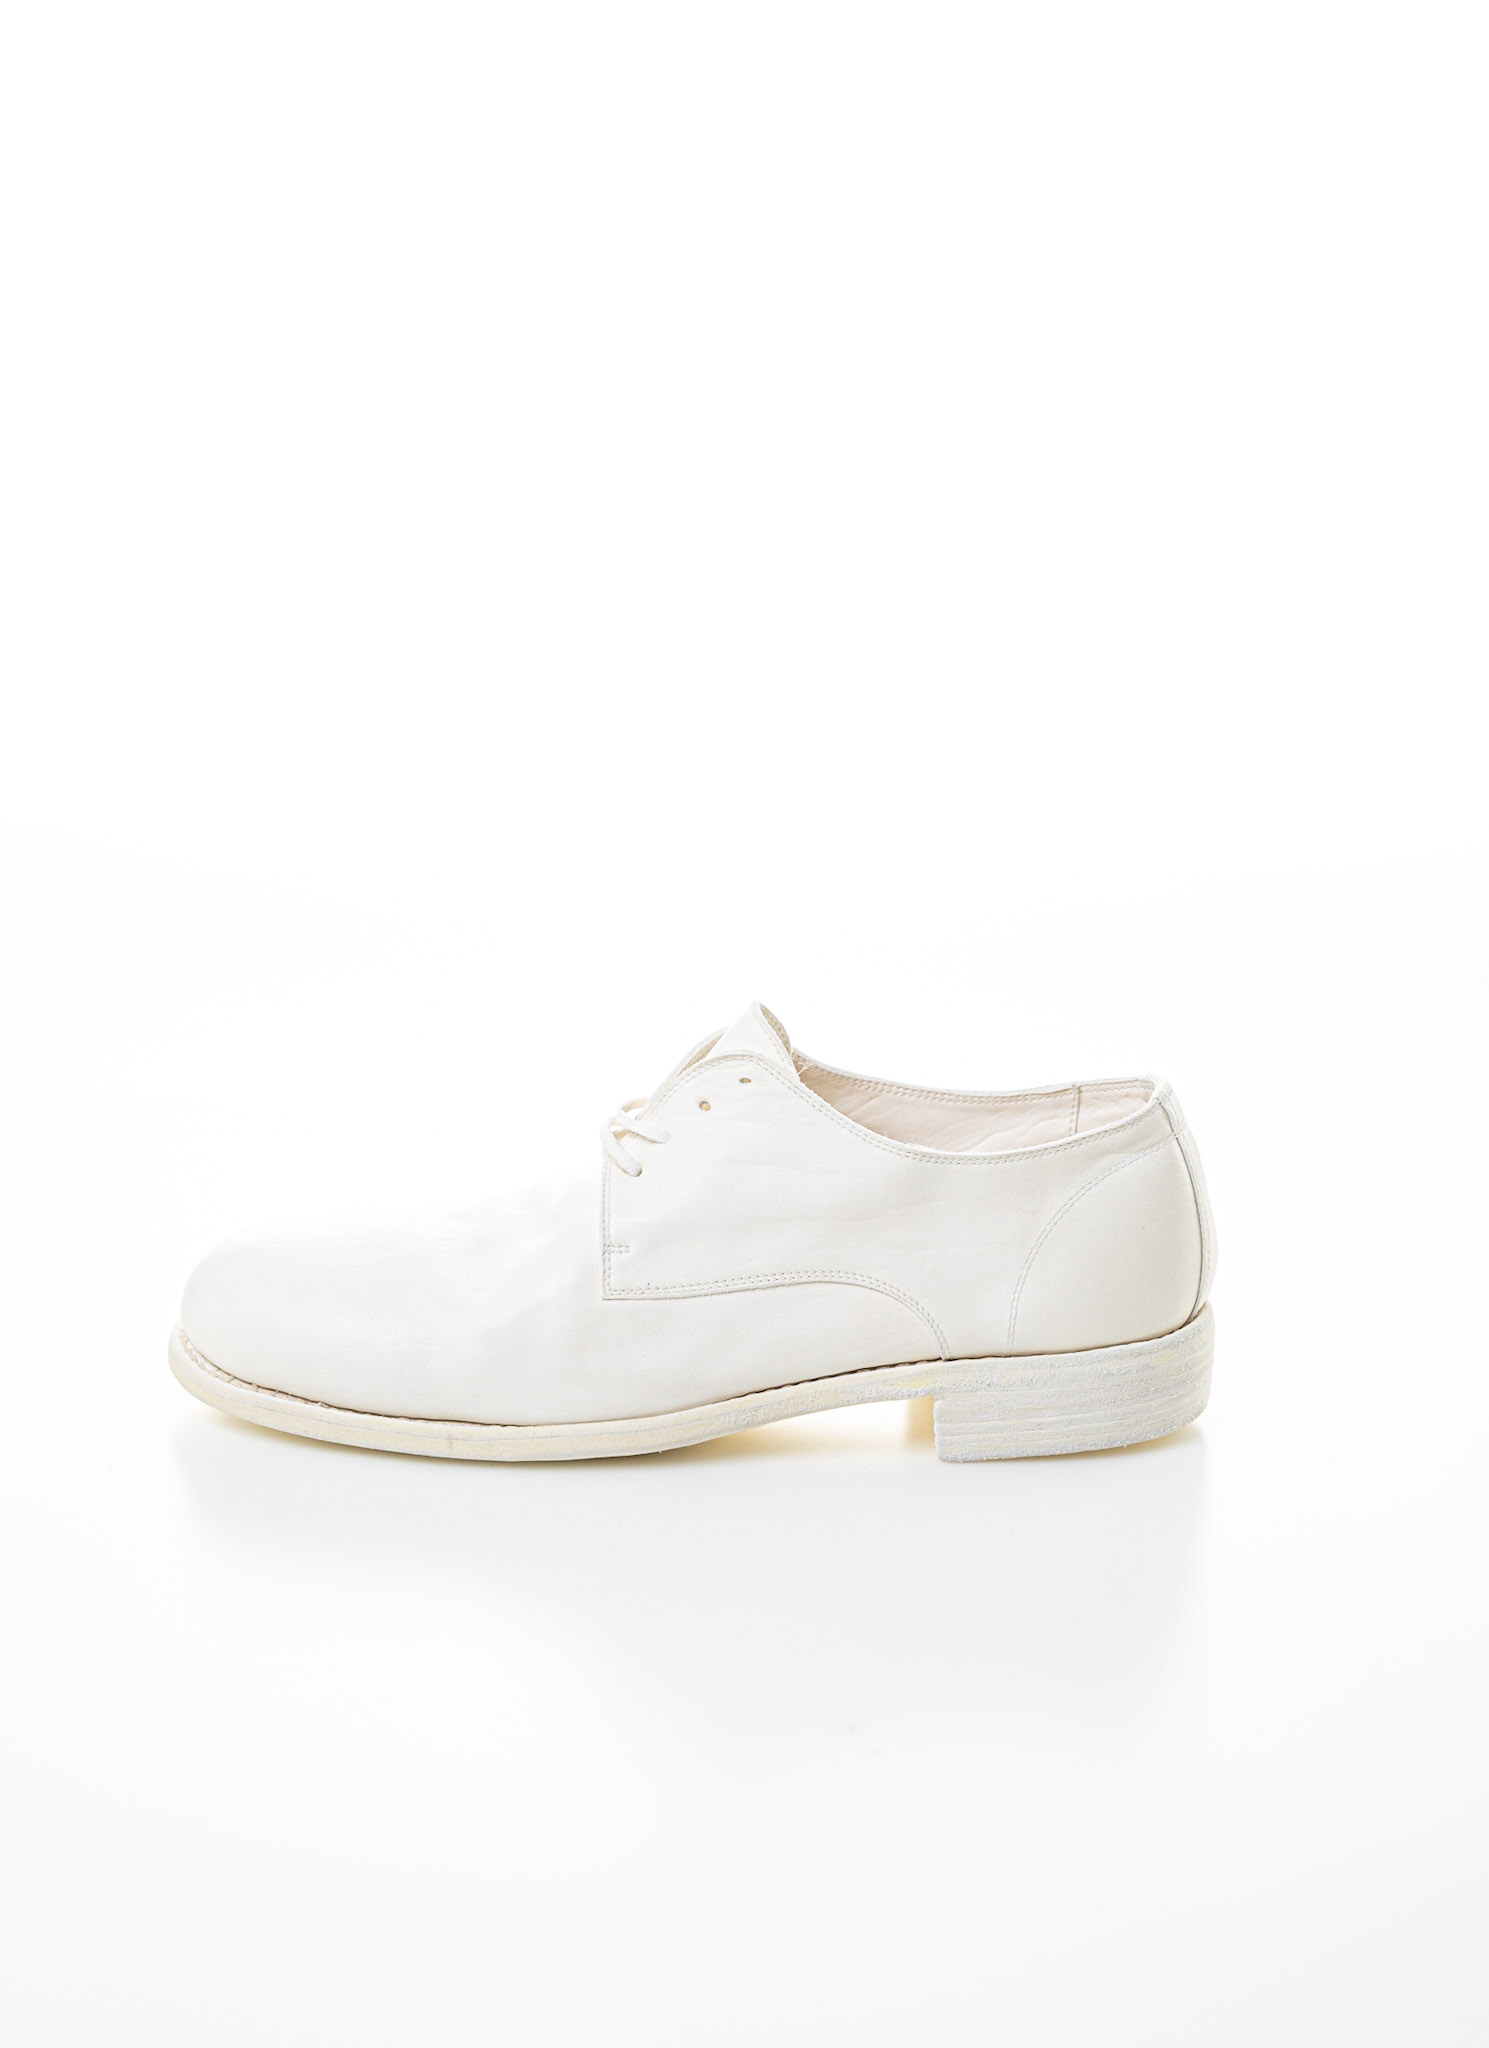 mens white derby shoes